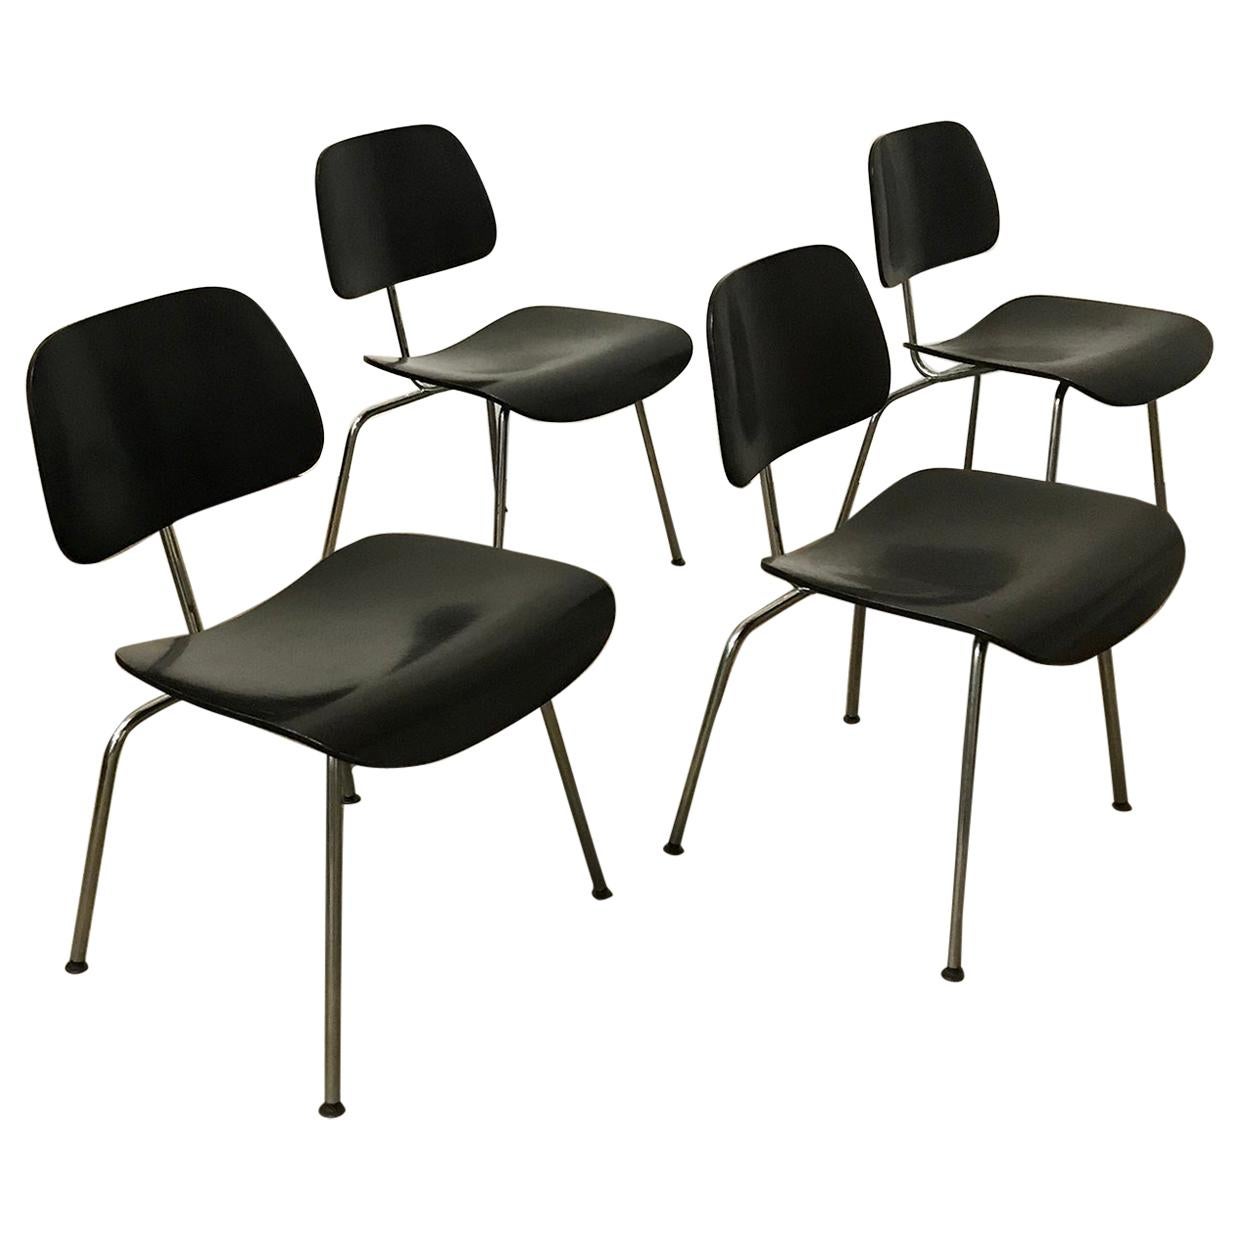 1946, Ray and Charles Eames for Herman Miller, Set of 4 DCM in Black Version